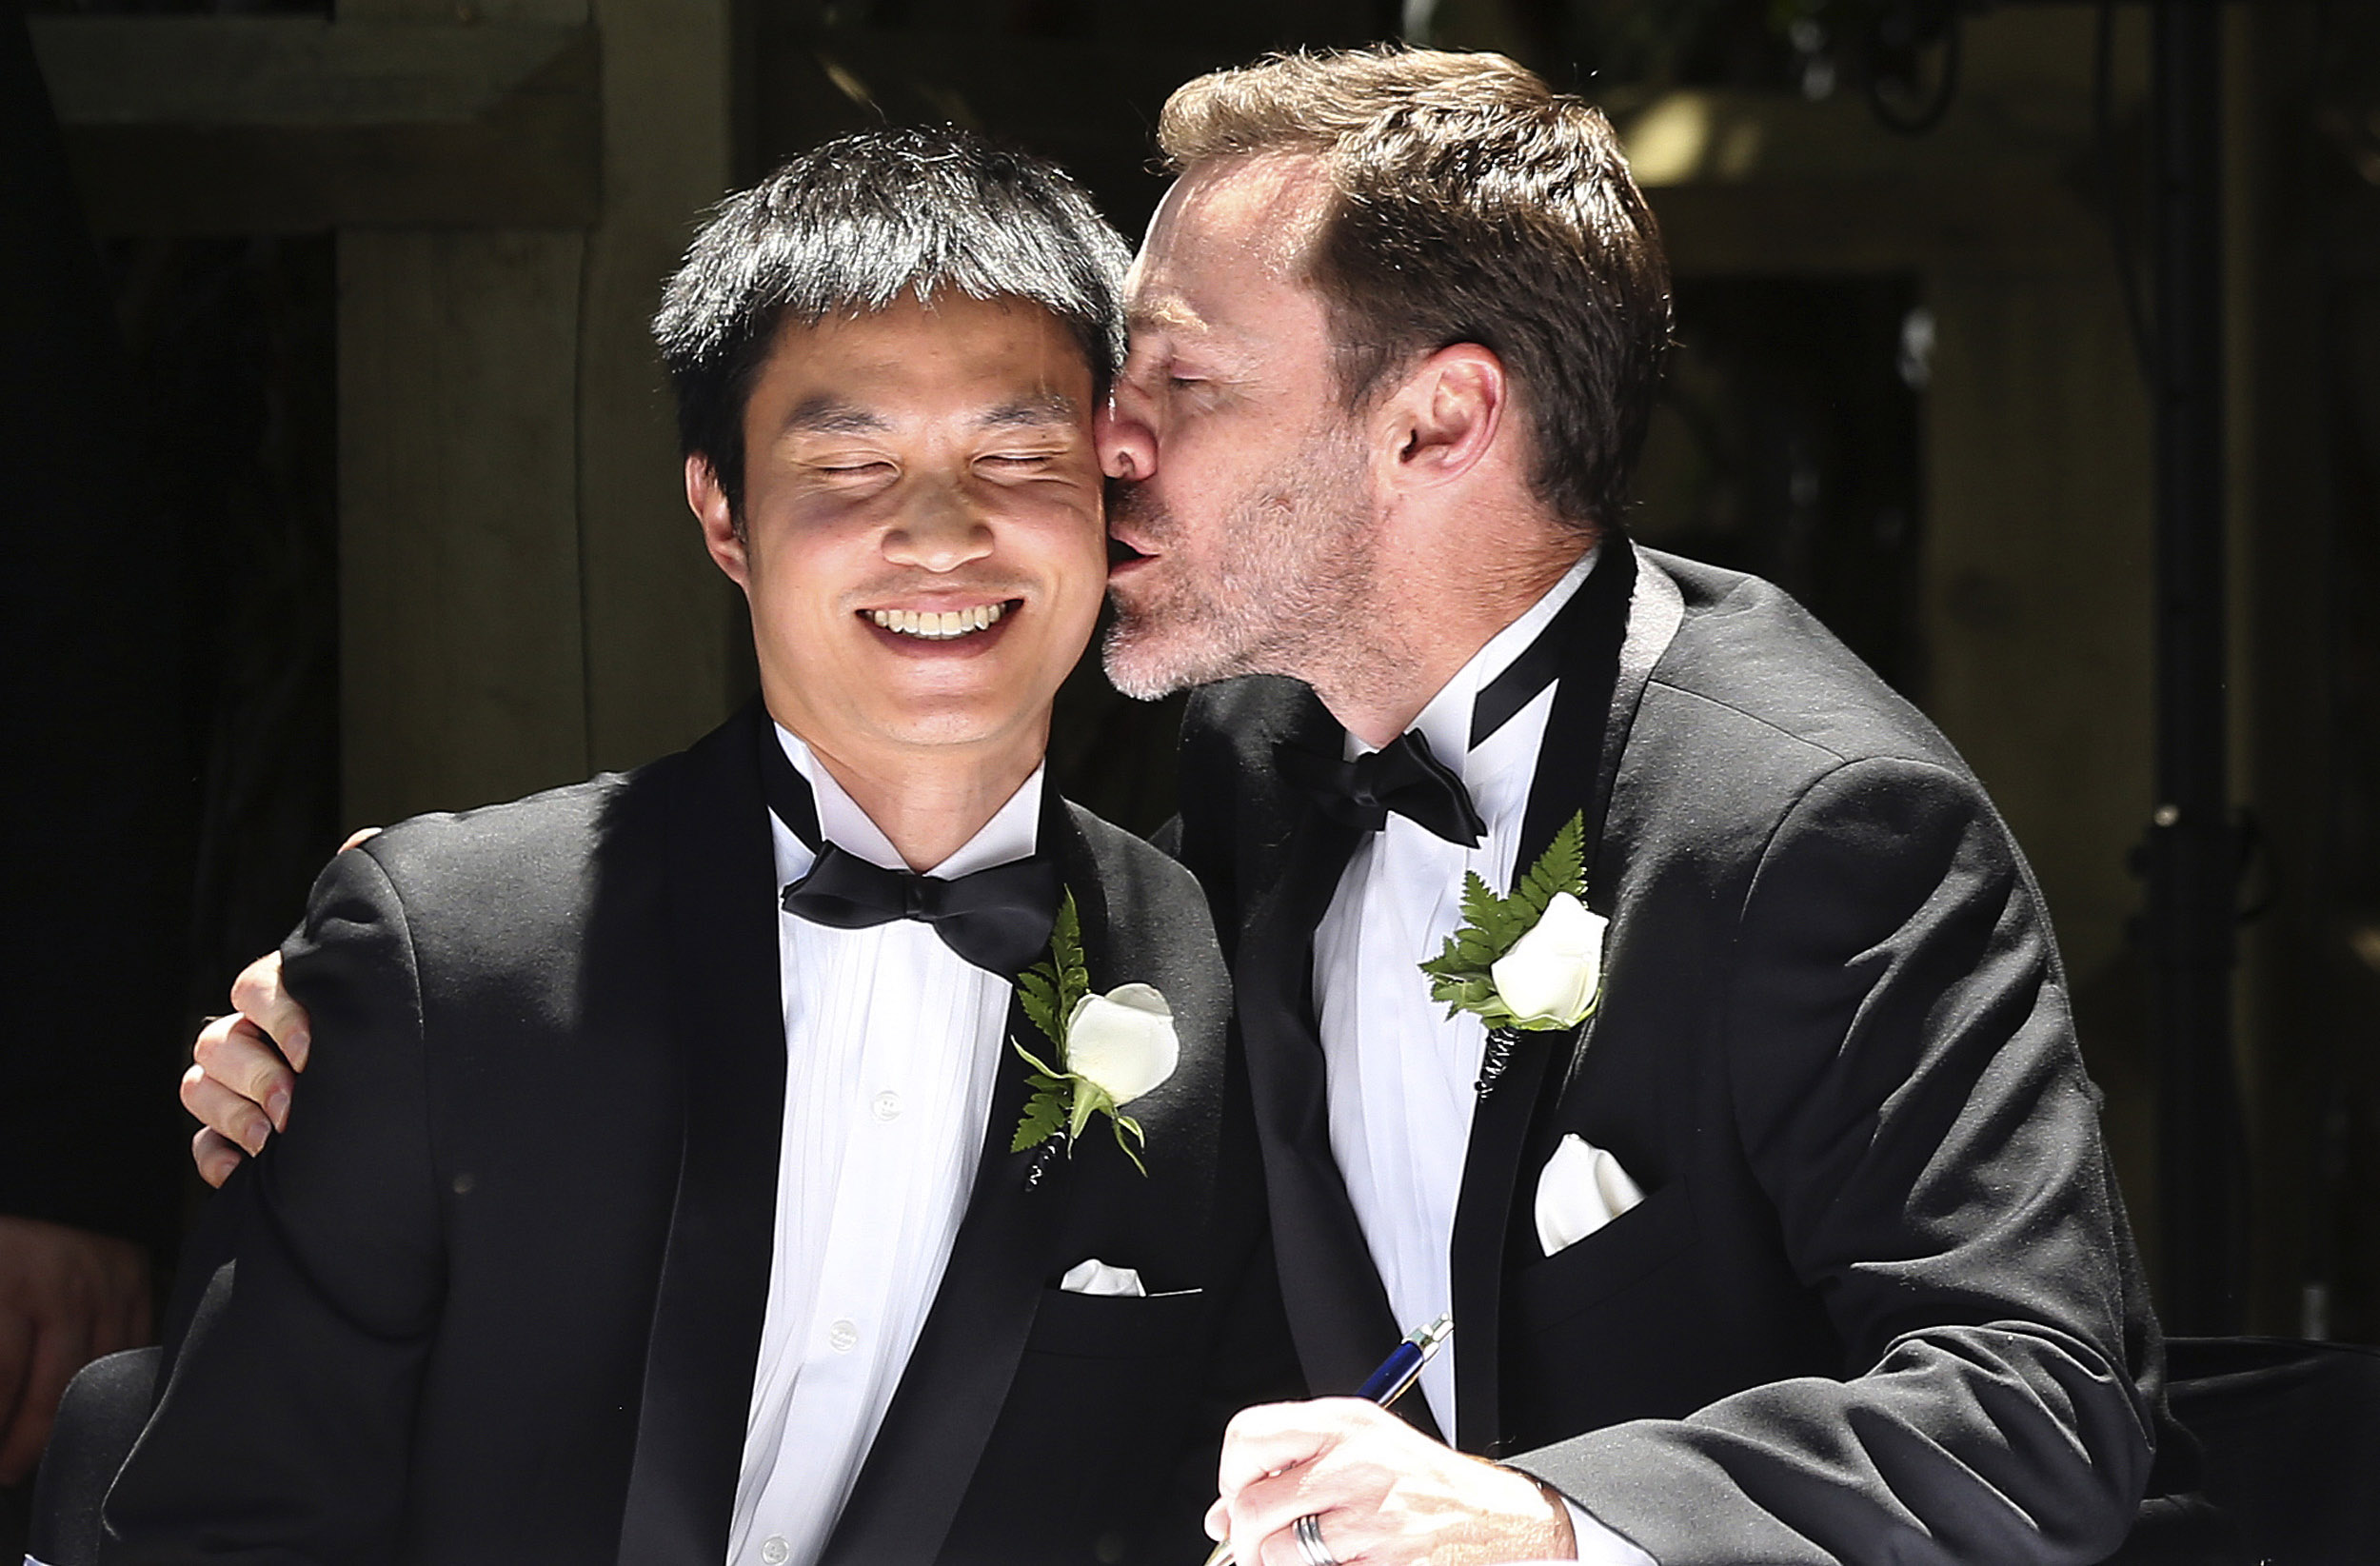 Majority Of Americans Continue To Oppose Gay Marriage